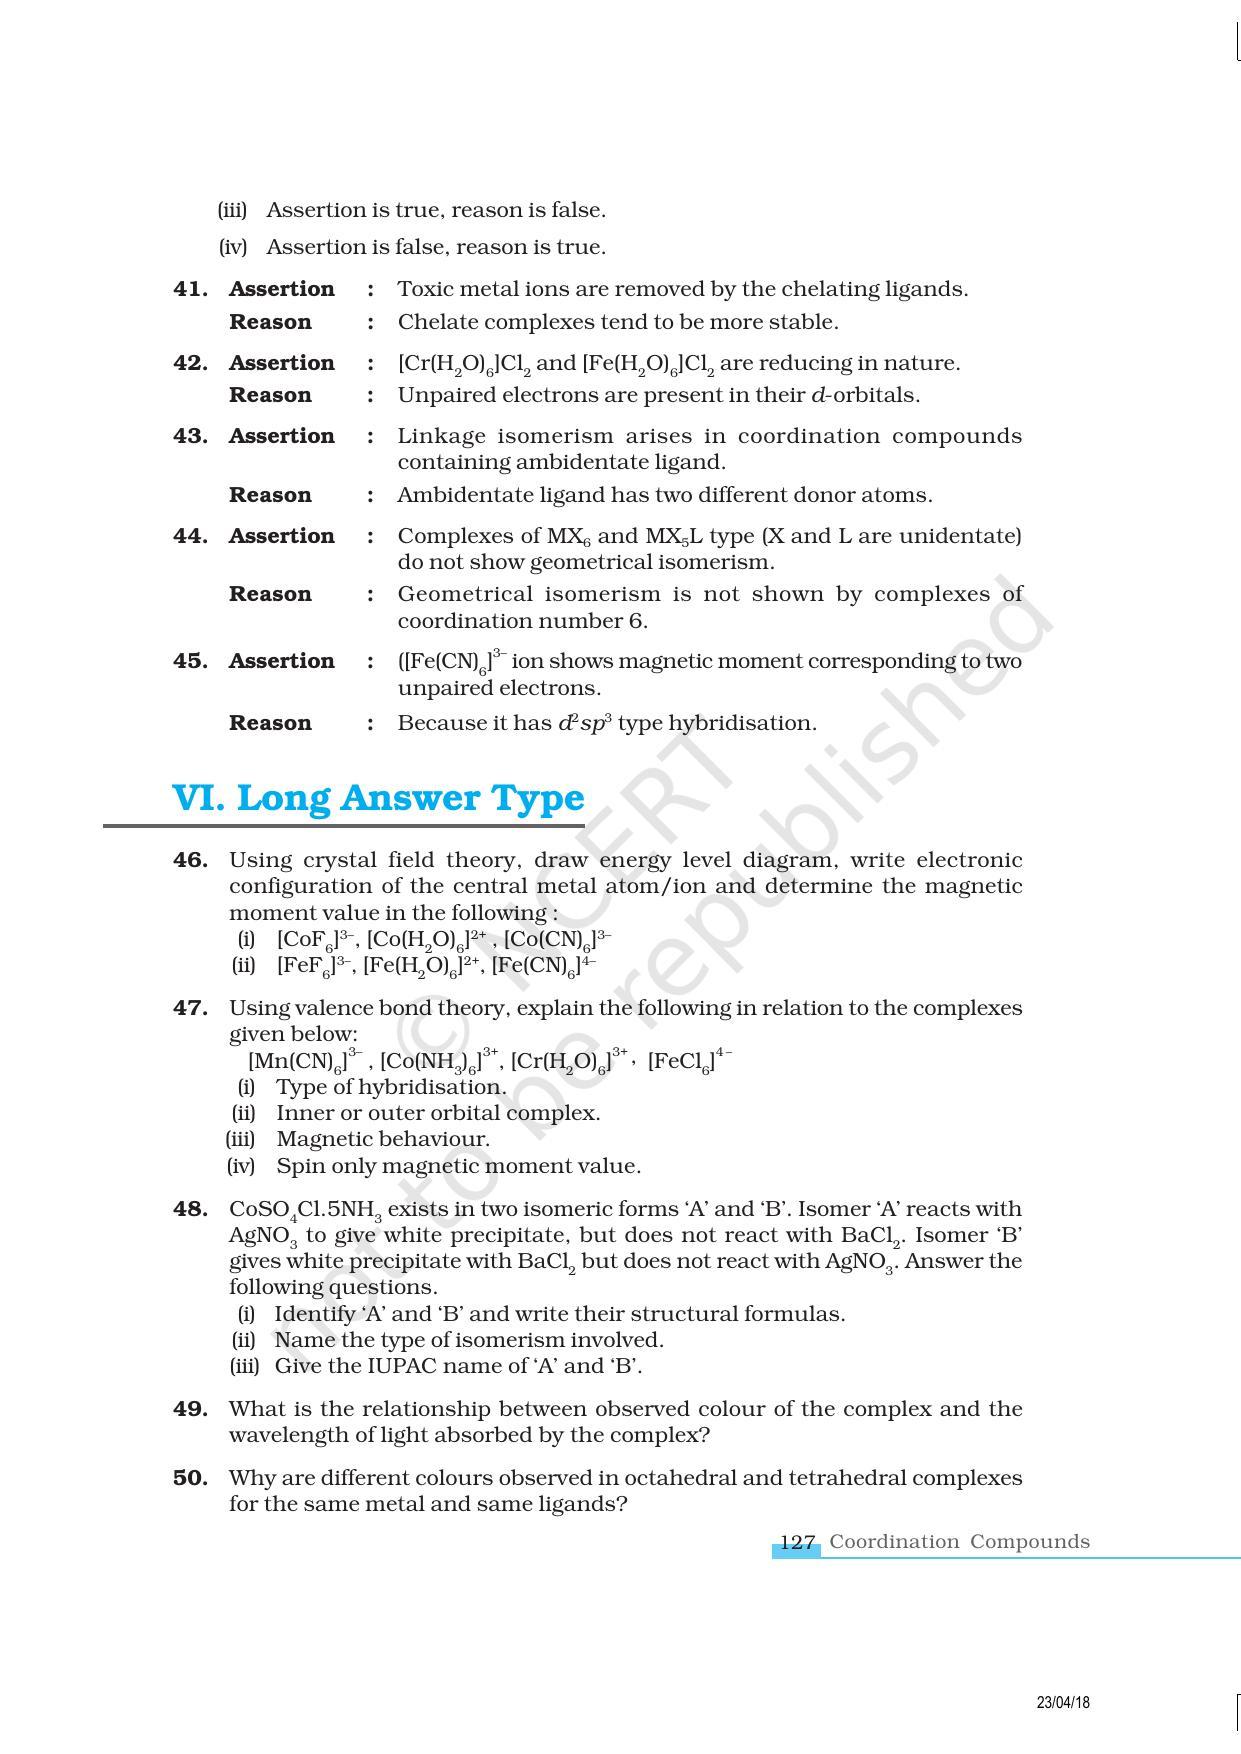 NCERT Exemplar Book for Class 12 Chemistry: Chapter 9 Coordination Compounds - Page 8